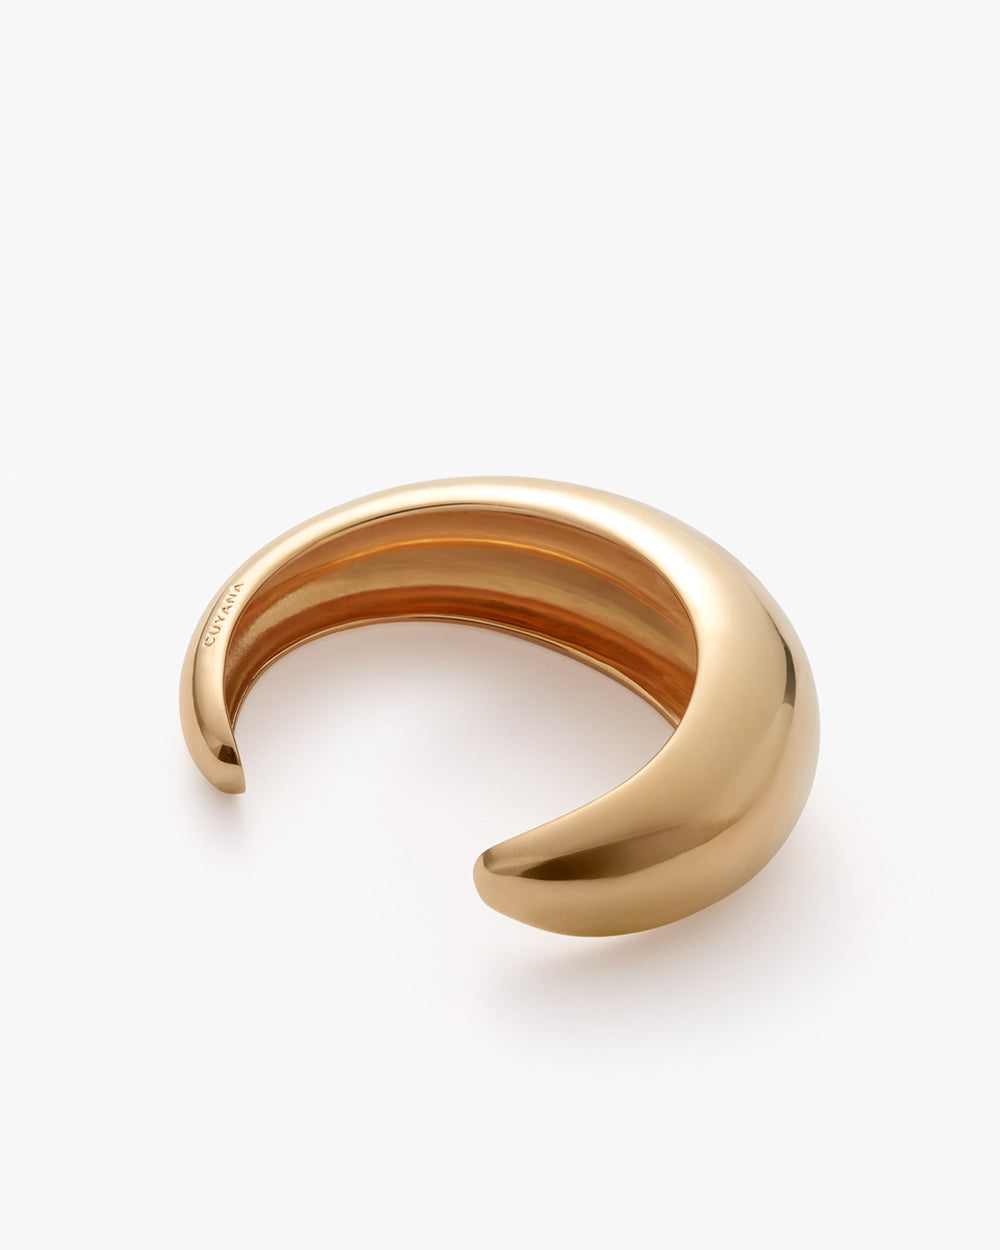 Gold-toned cuff bracelet on a white background.